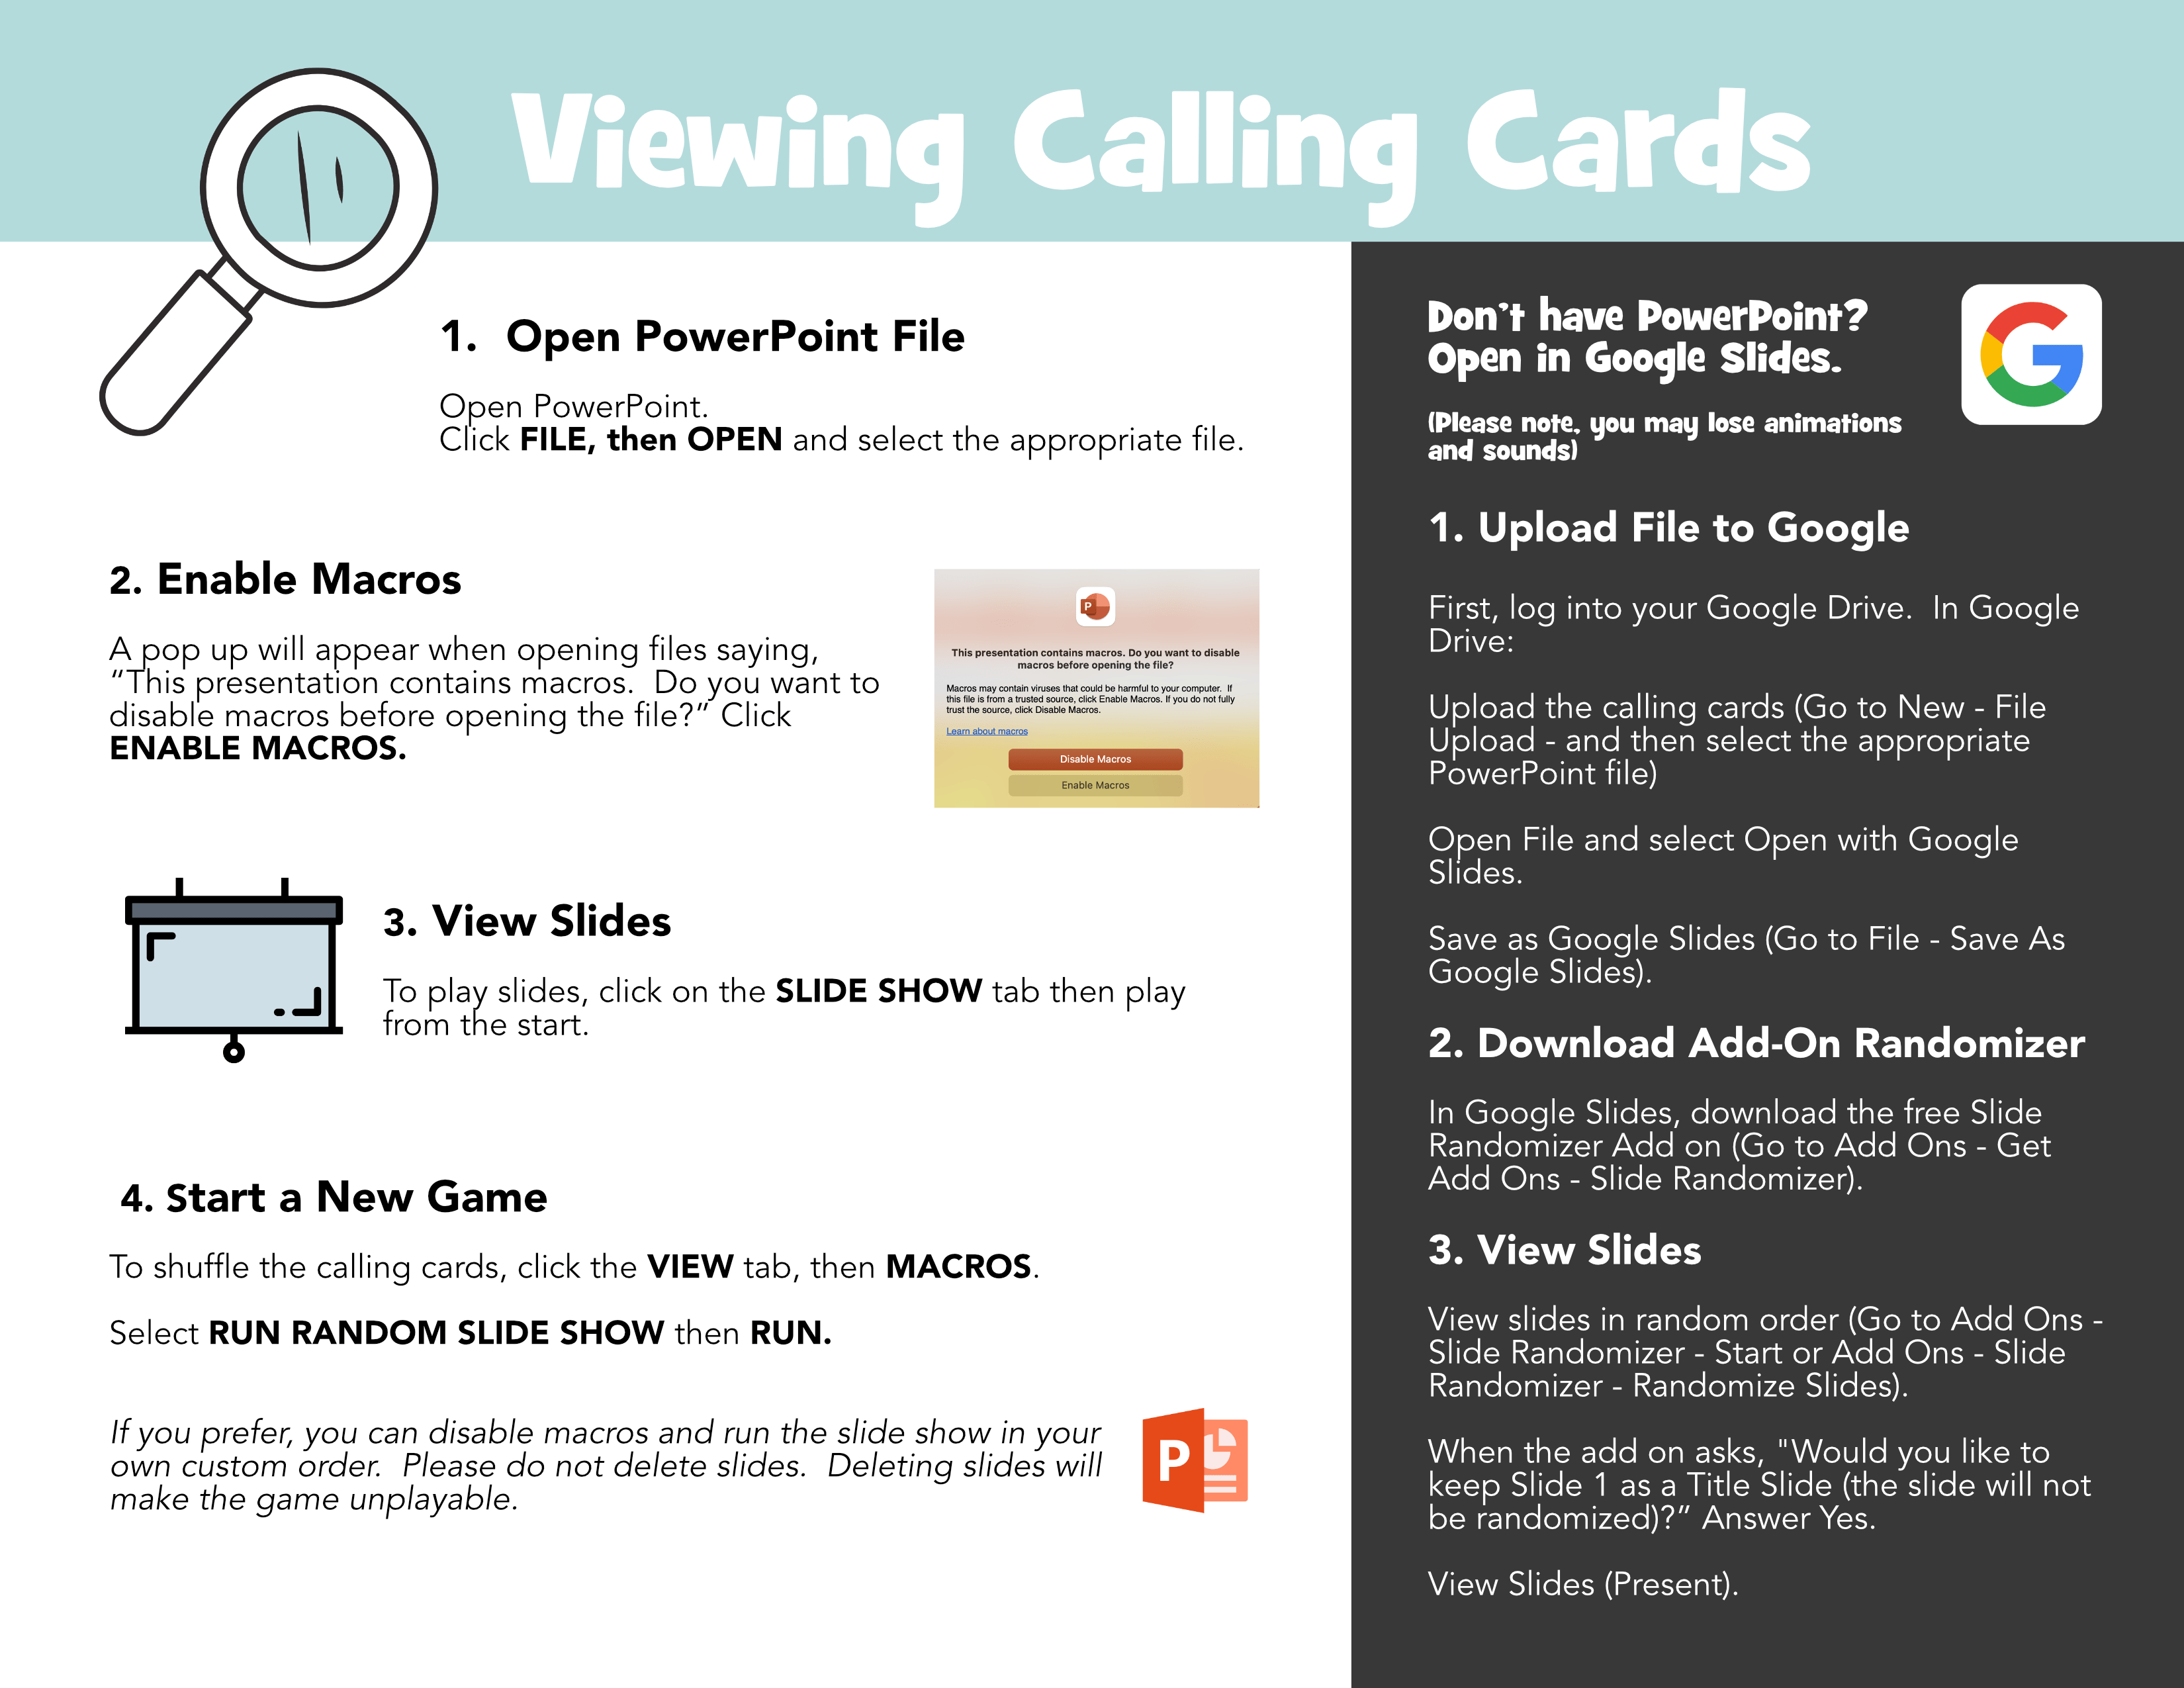 How to View Calling Cards in PowerPoint